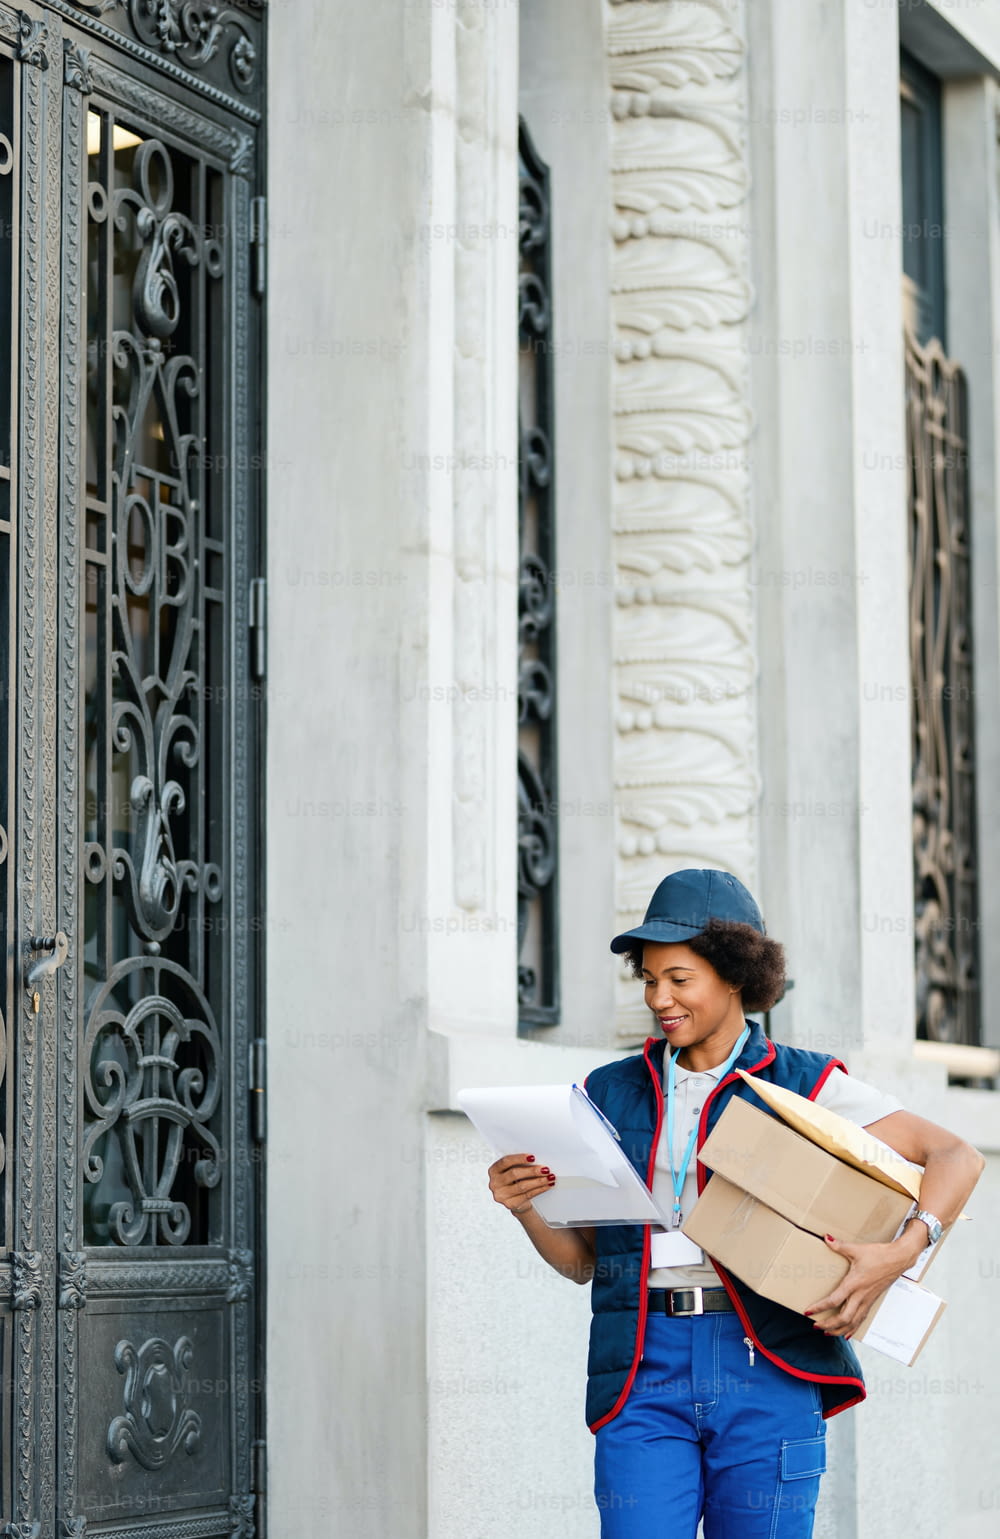 Smiling African American female courier delivering packages while reading address on the list in the city.